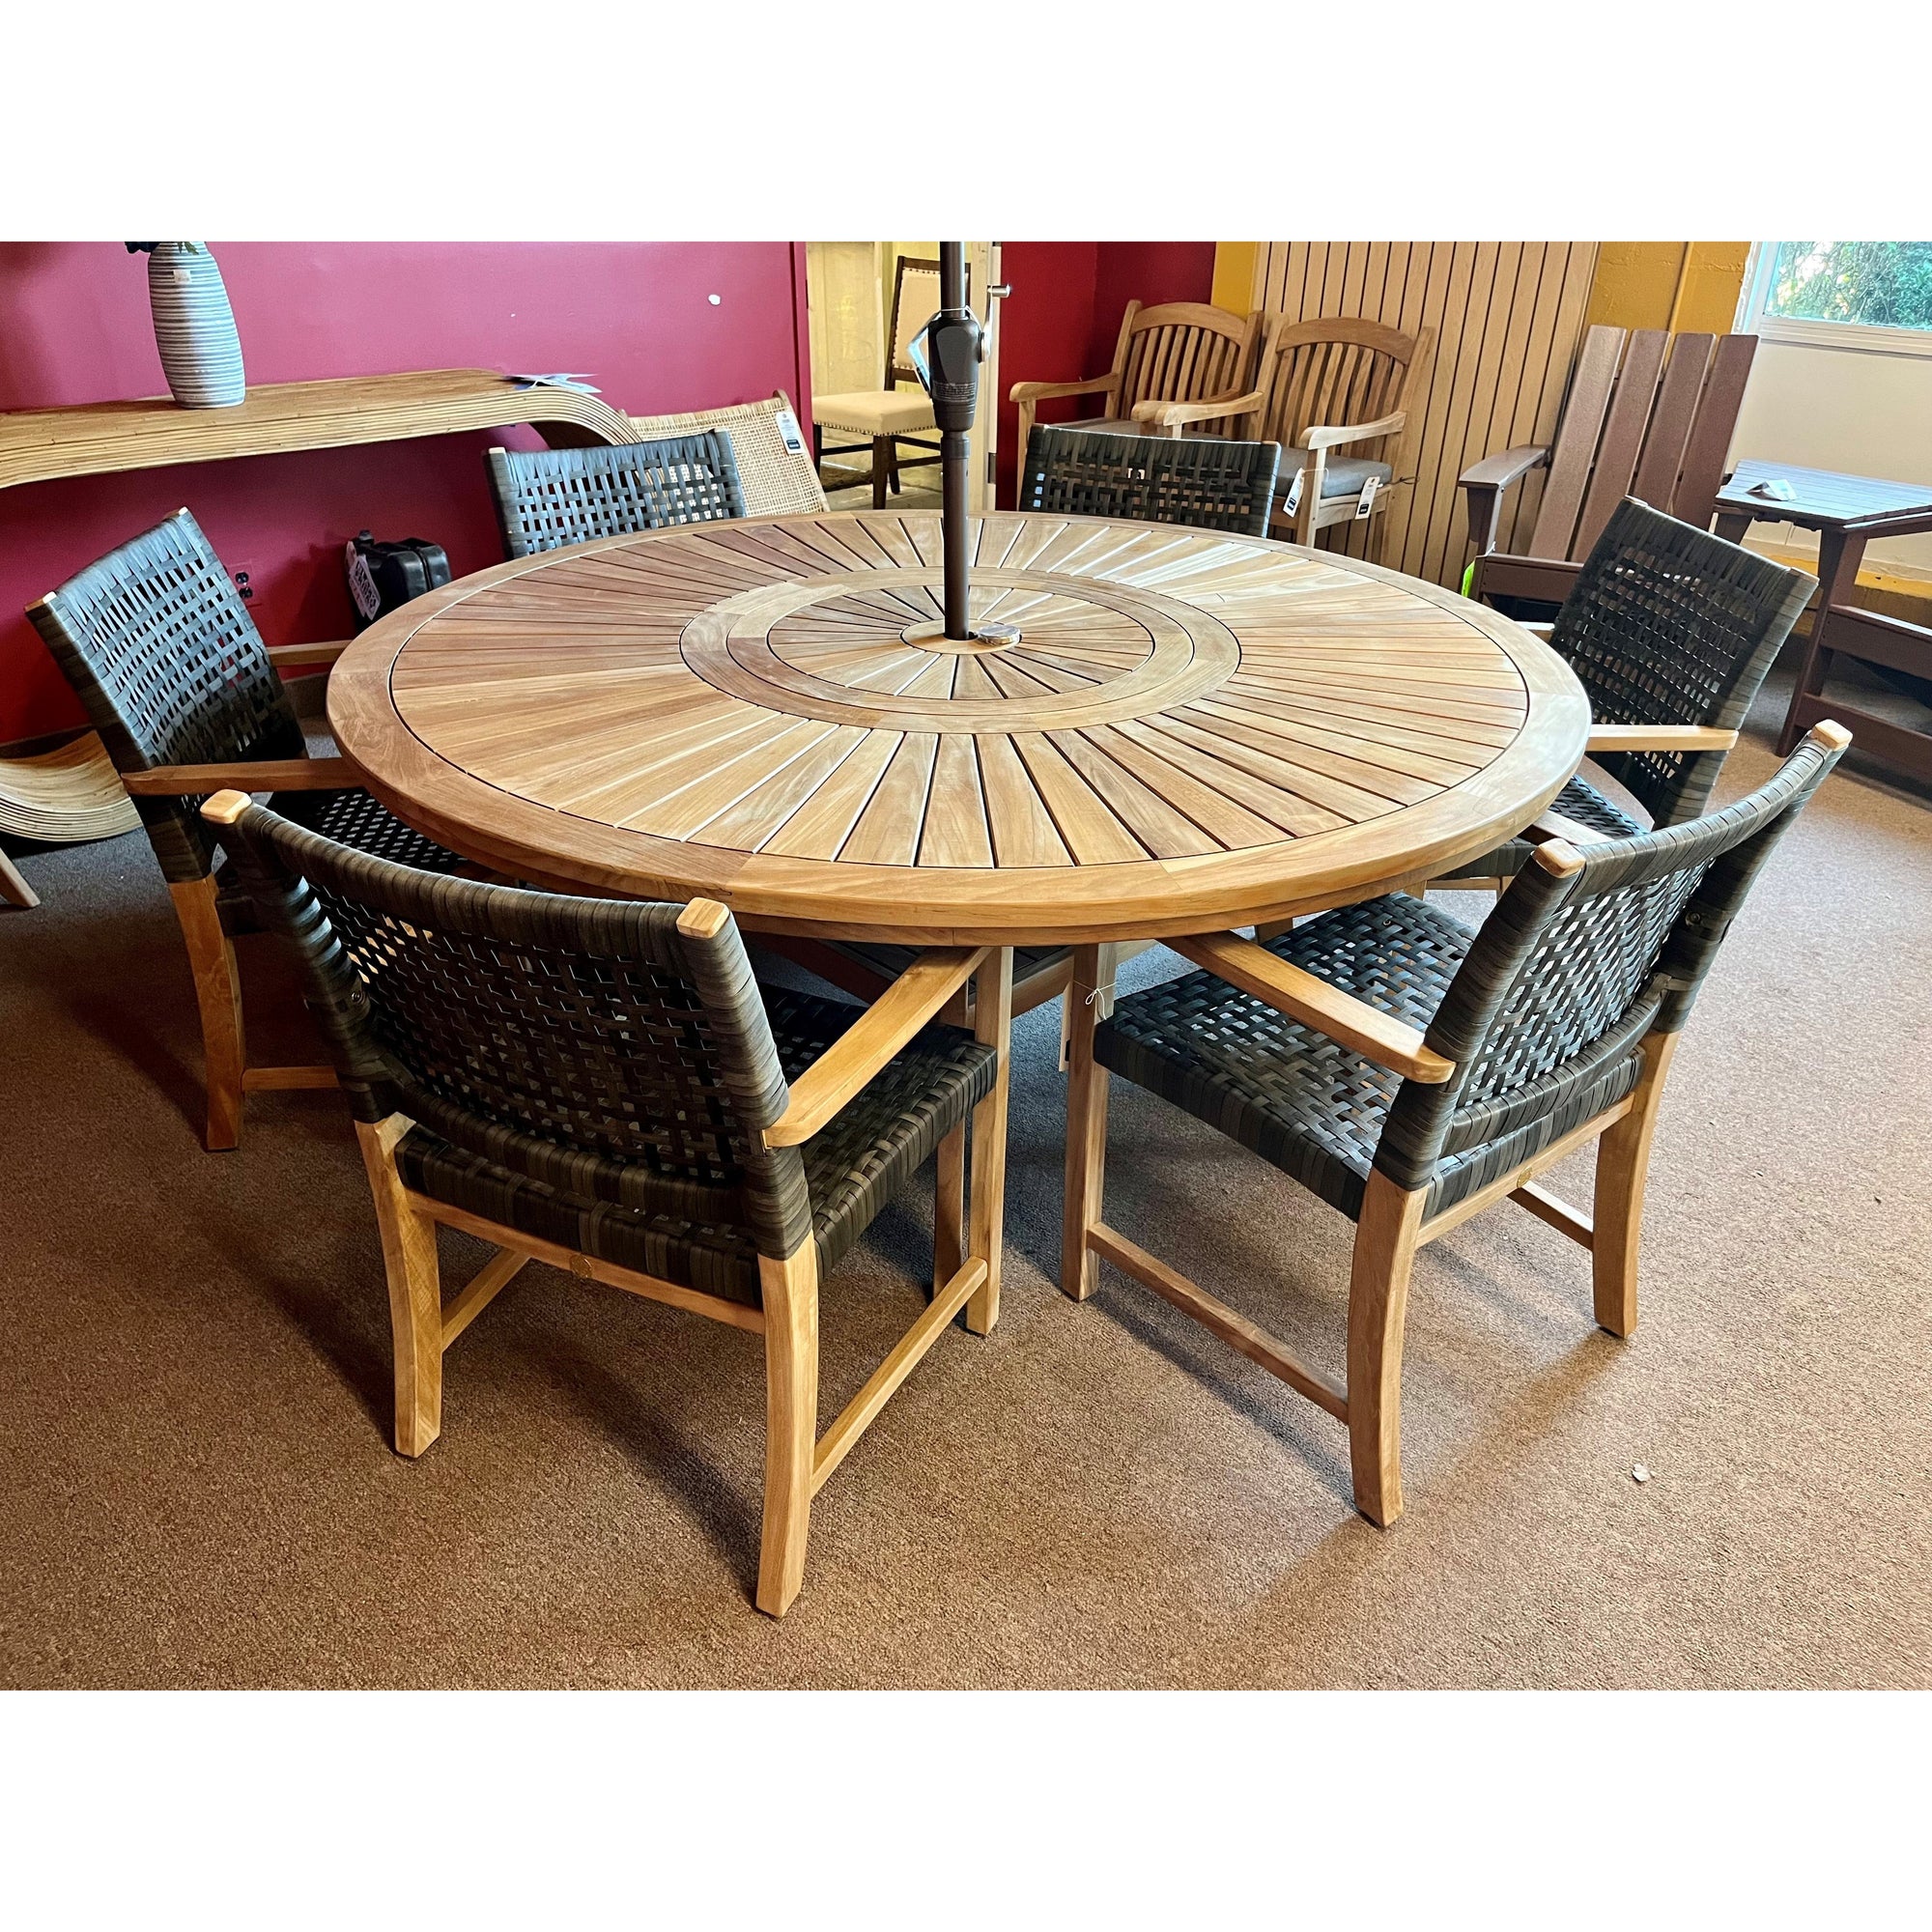 Komodo Teak 70" Round Table with Lazy Susan- 7-Piece Outdoor Dining Set (with 6 Sanur Woven Chairs)